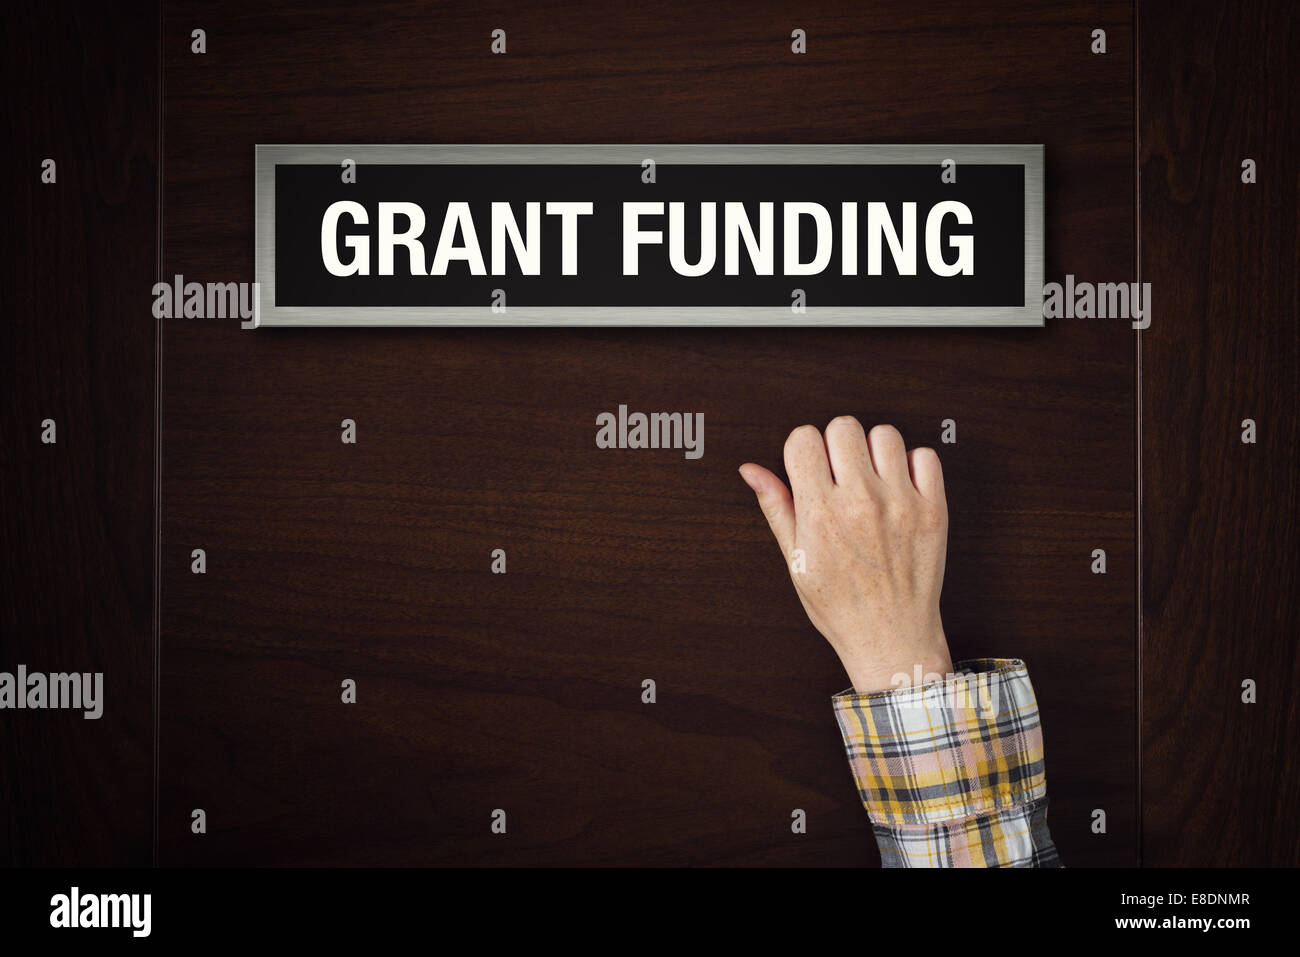 Female hand is knocking on Grant Funding door, conceptual image. Stock Photo